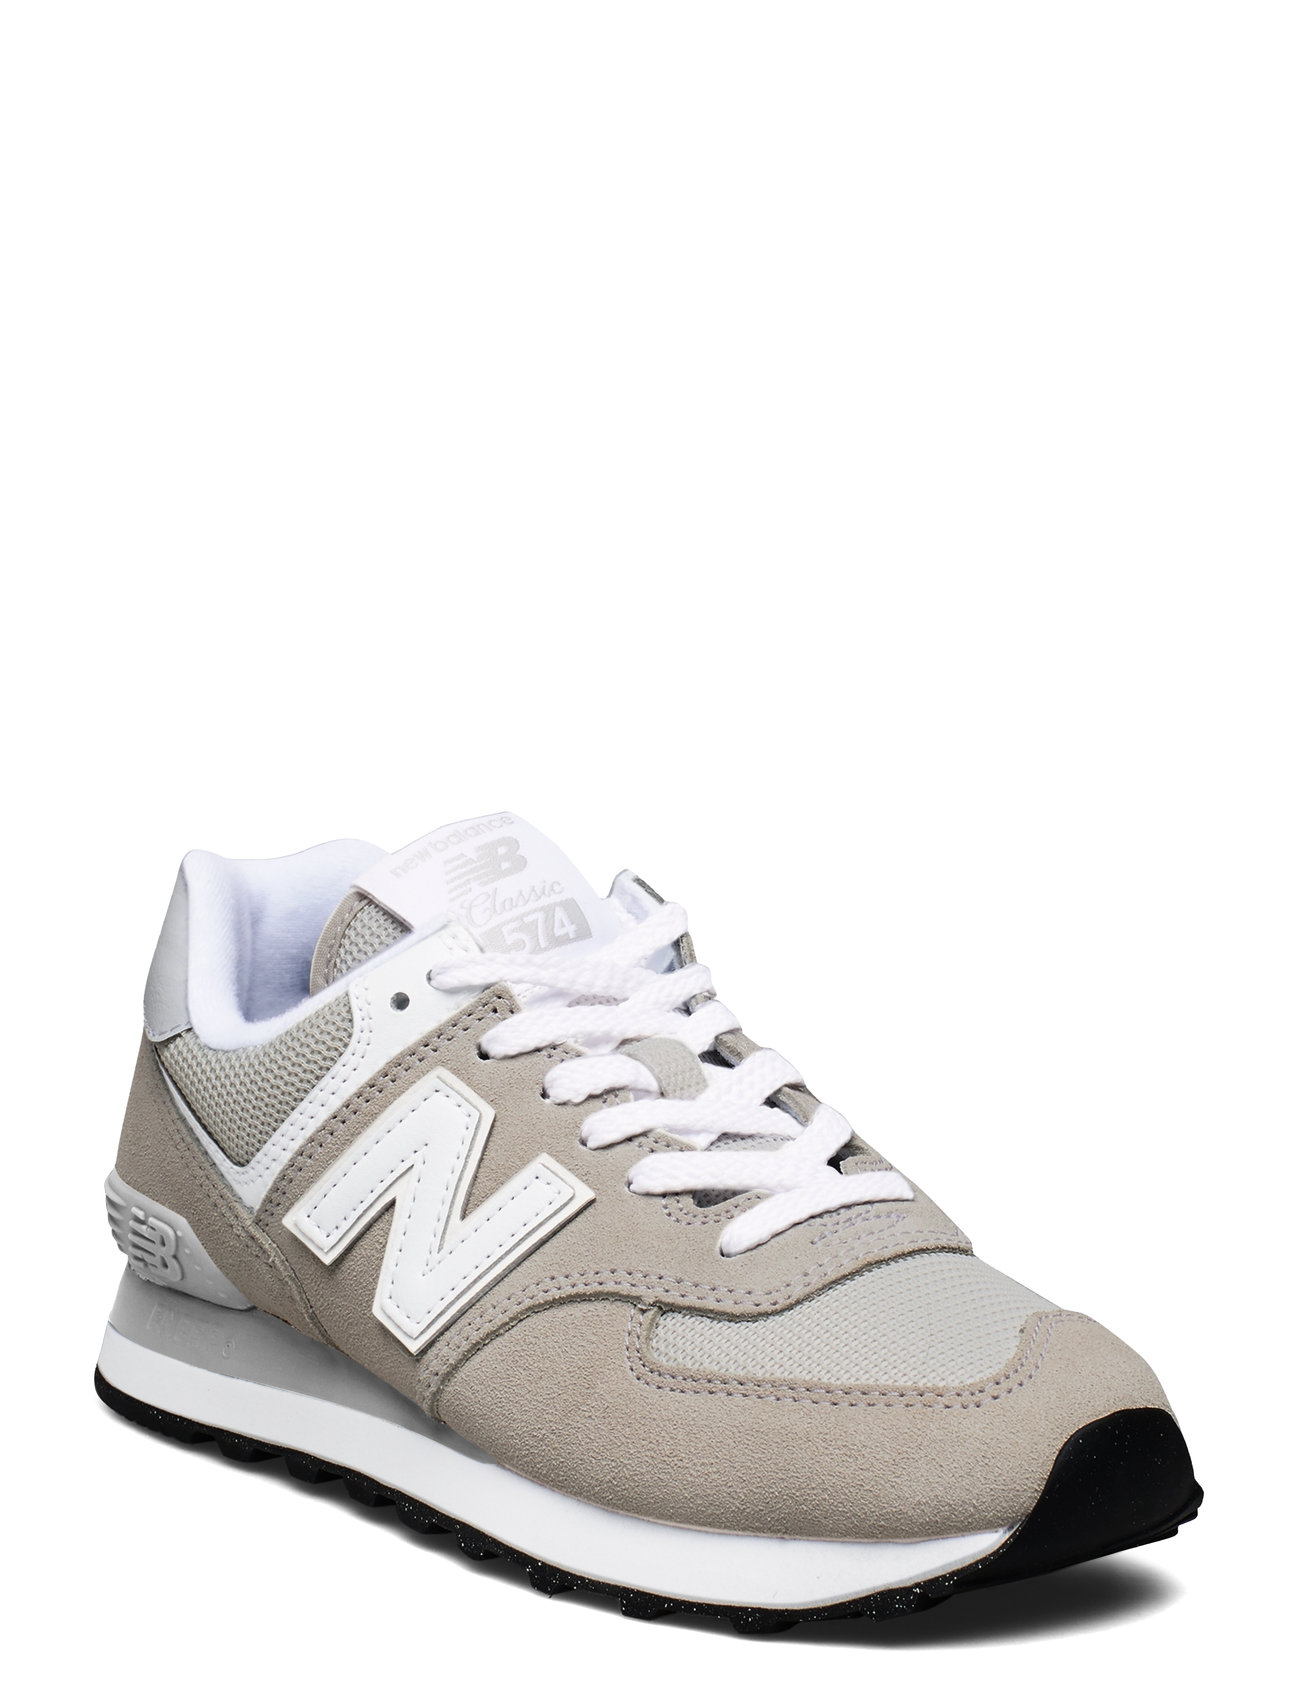 New Balance 574 Sport Sneakers Low-top Sneakers Grey New Balance